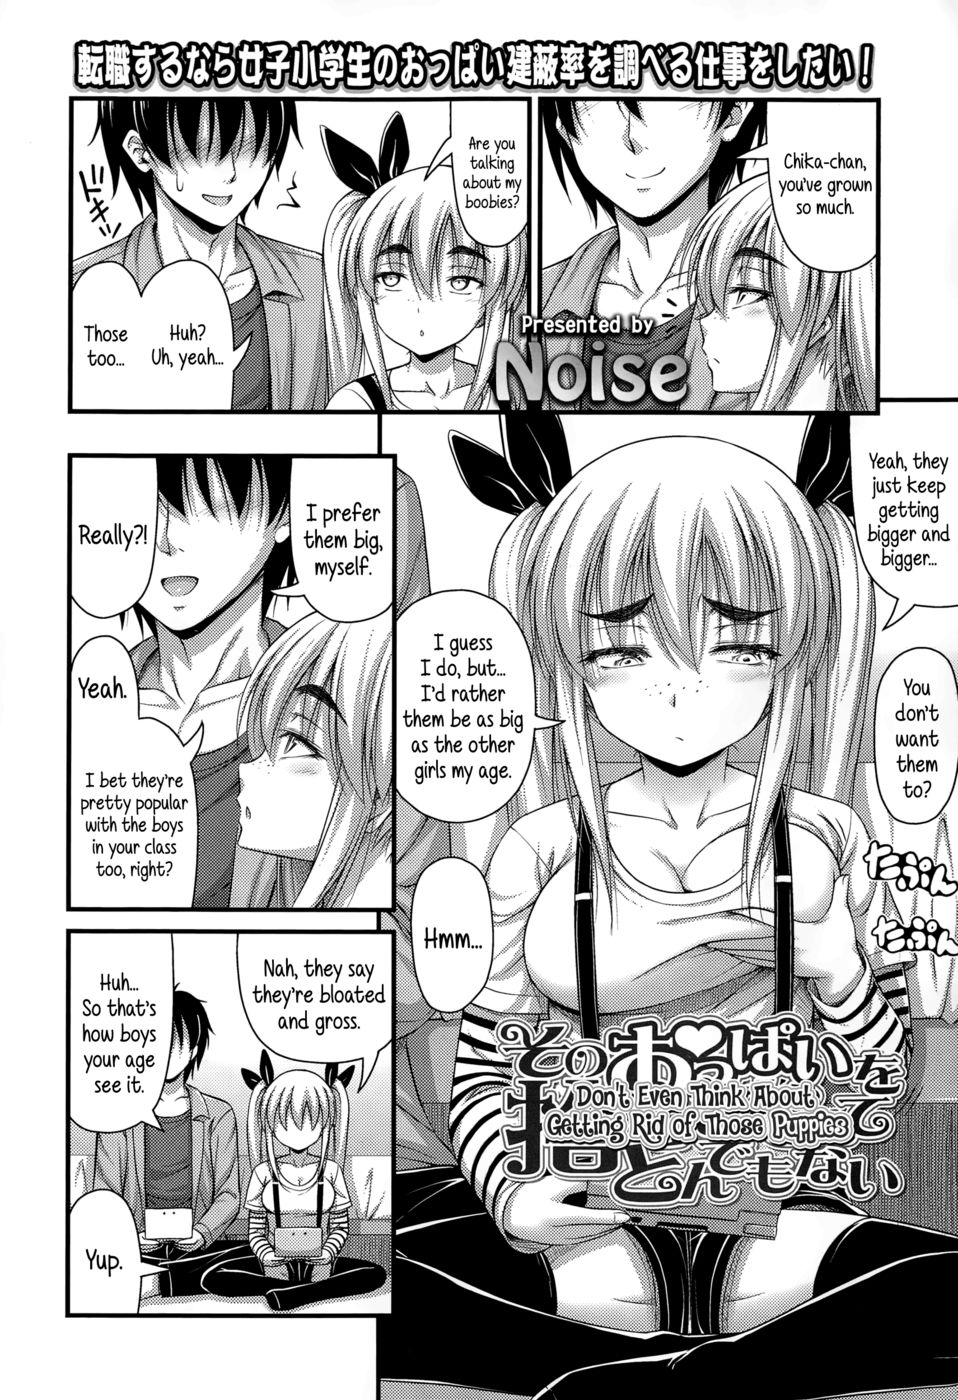 Hentai Manga Comic-Don't Even Think About Getting Rid of Those Puppies-Read-2